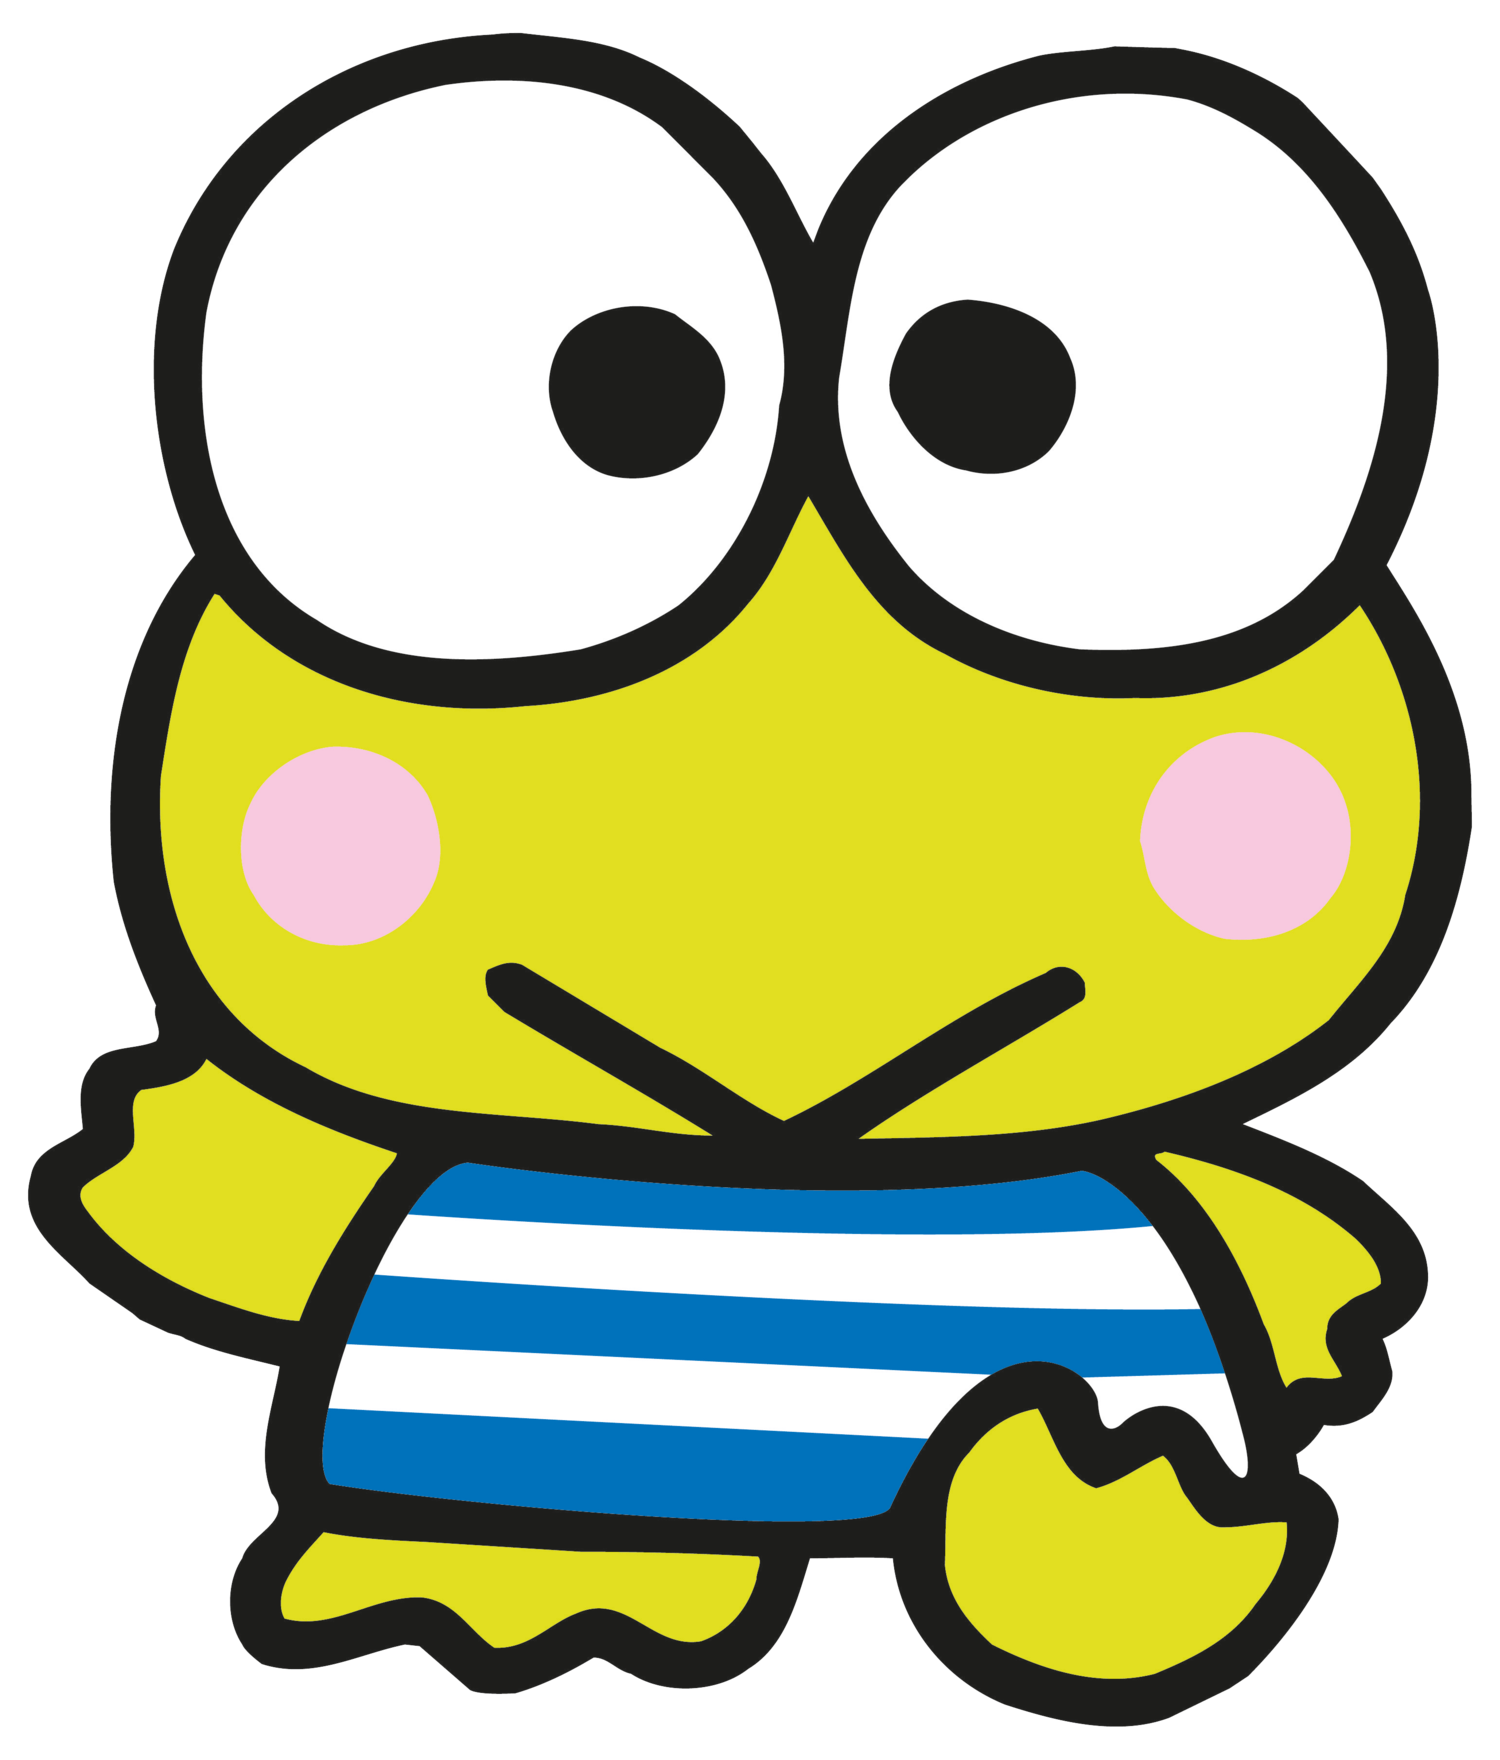 A Cartoon Frog With A Striped Shirt